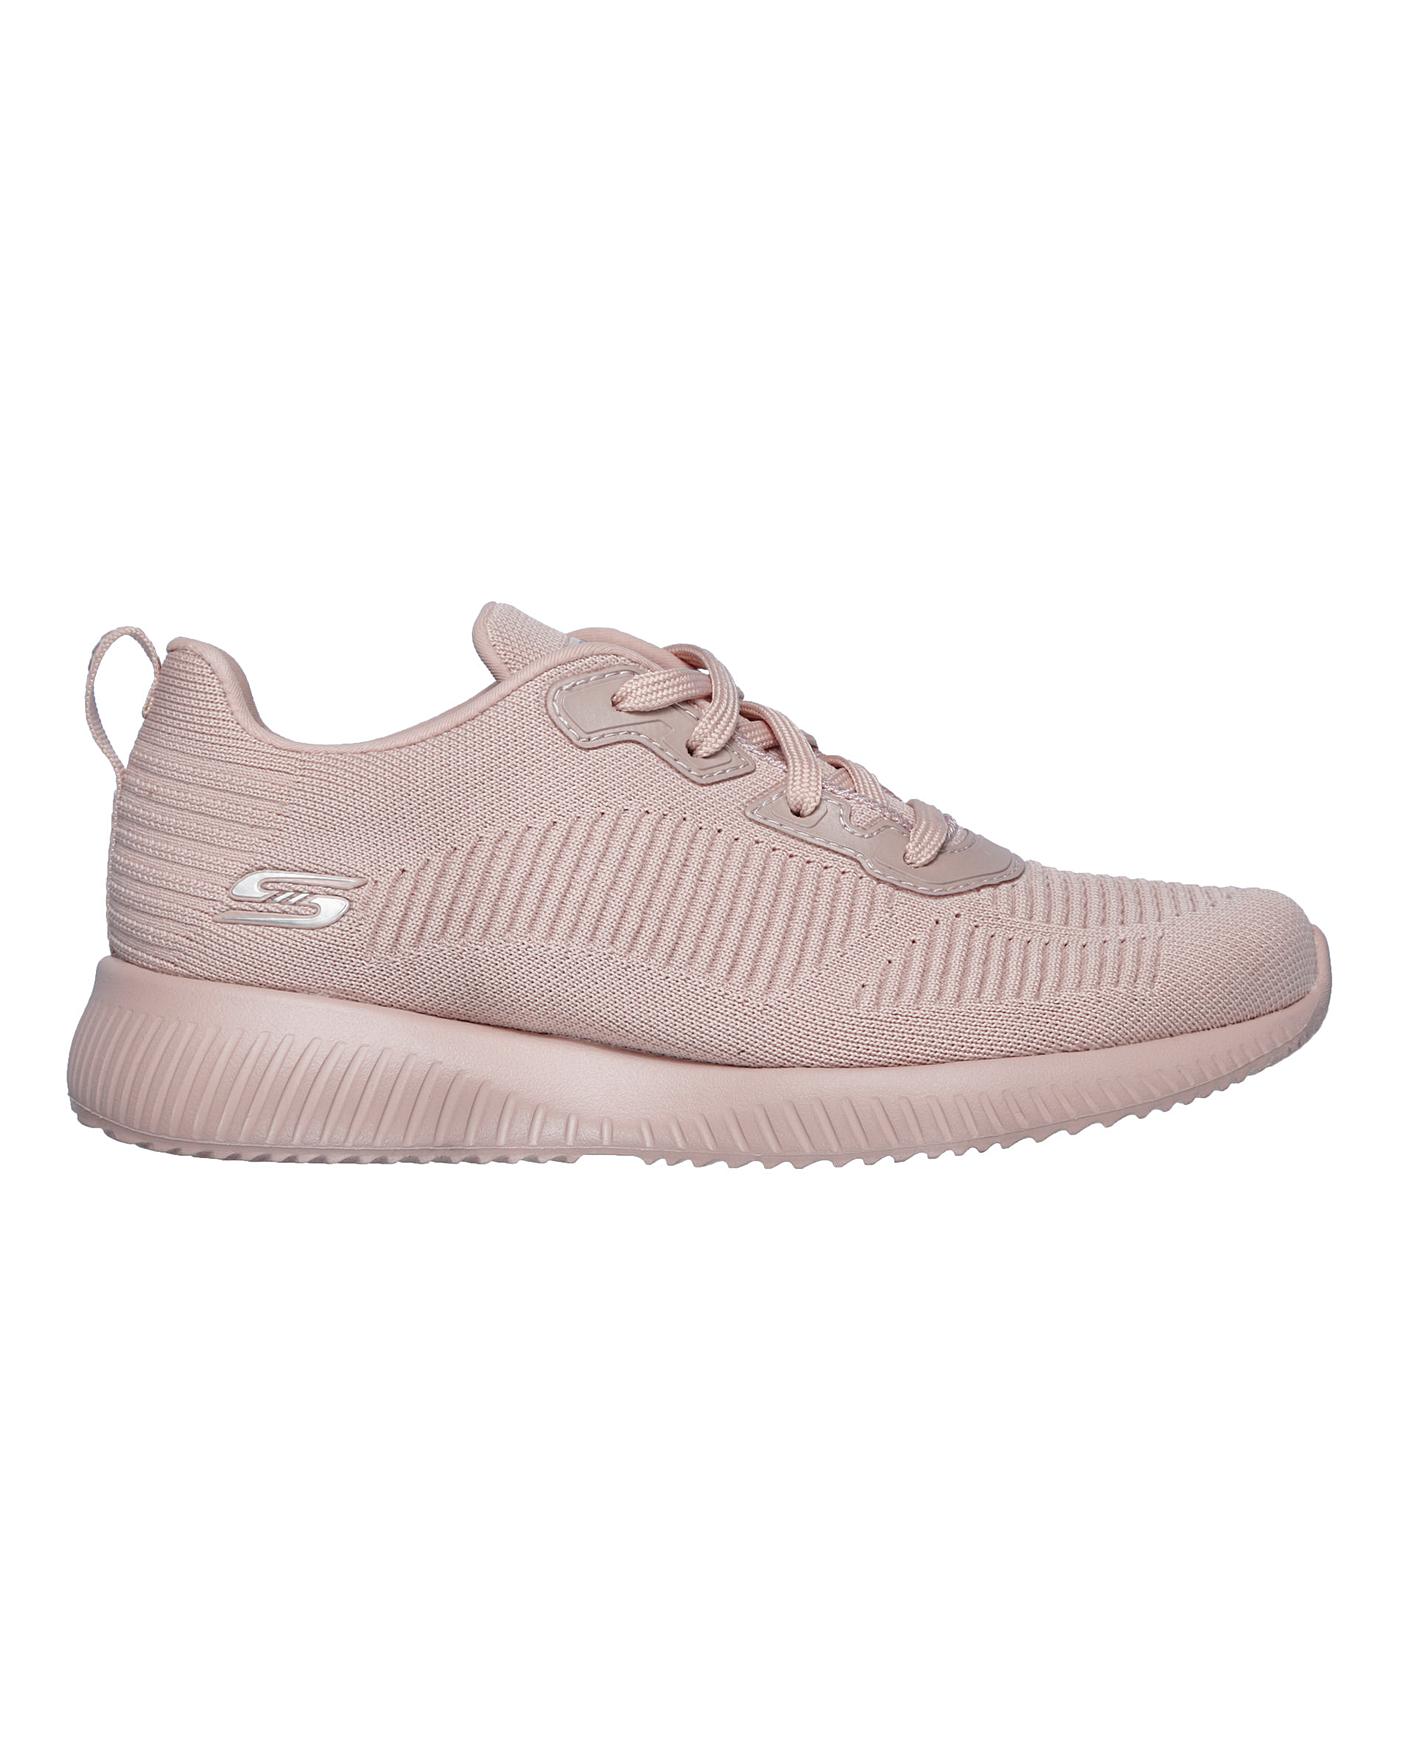 skechers bobs trainers